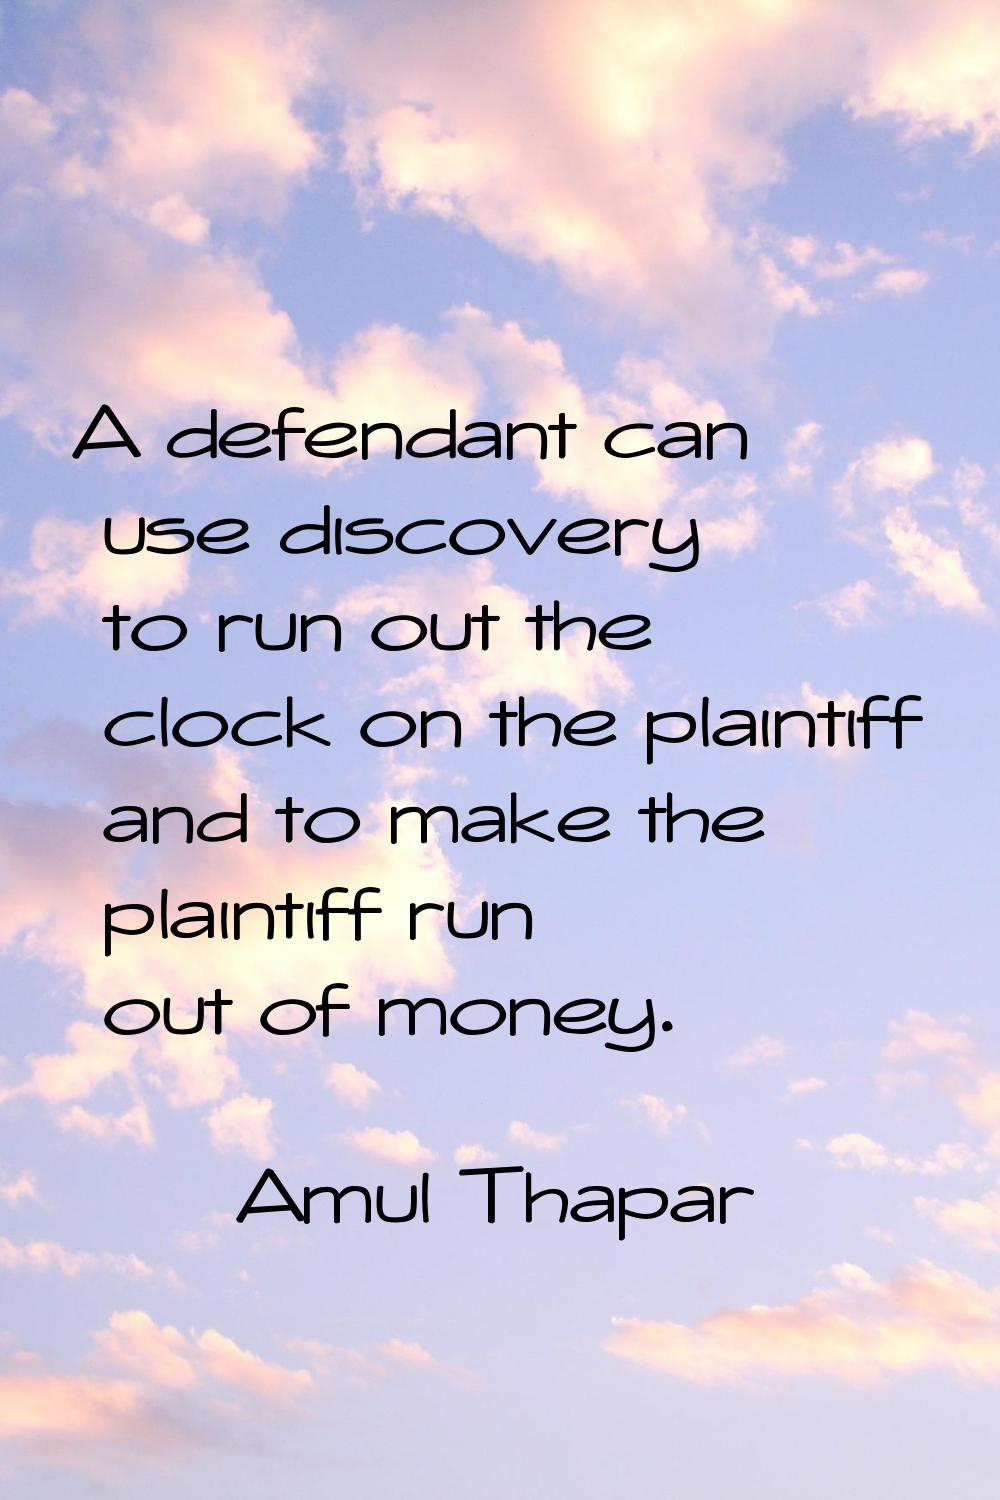 A defendant can use discovery to run out the clock on the plaintiff and to make the plaintiff run o